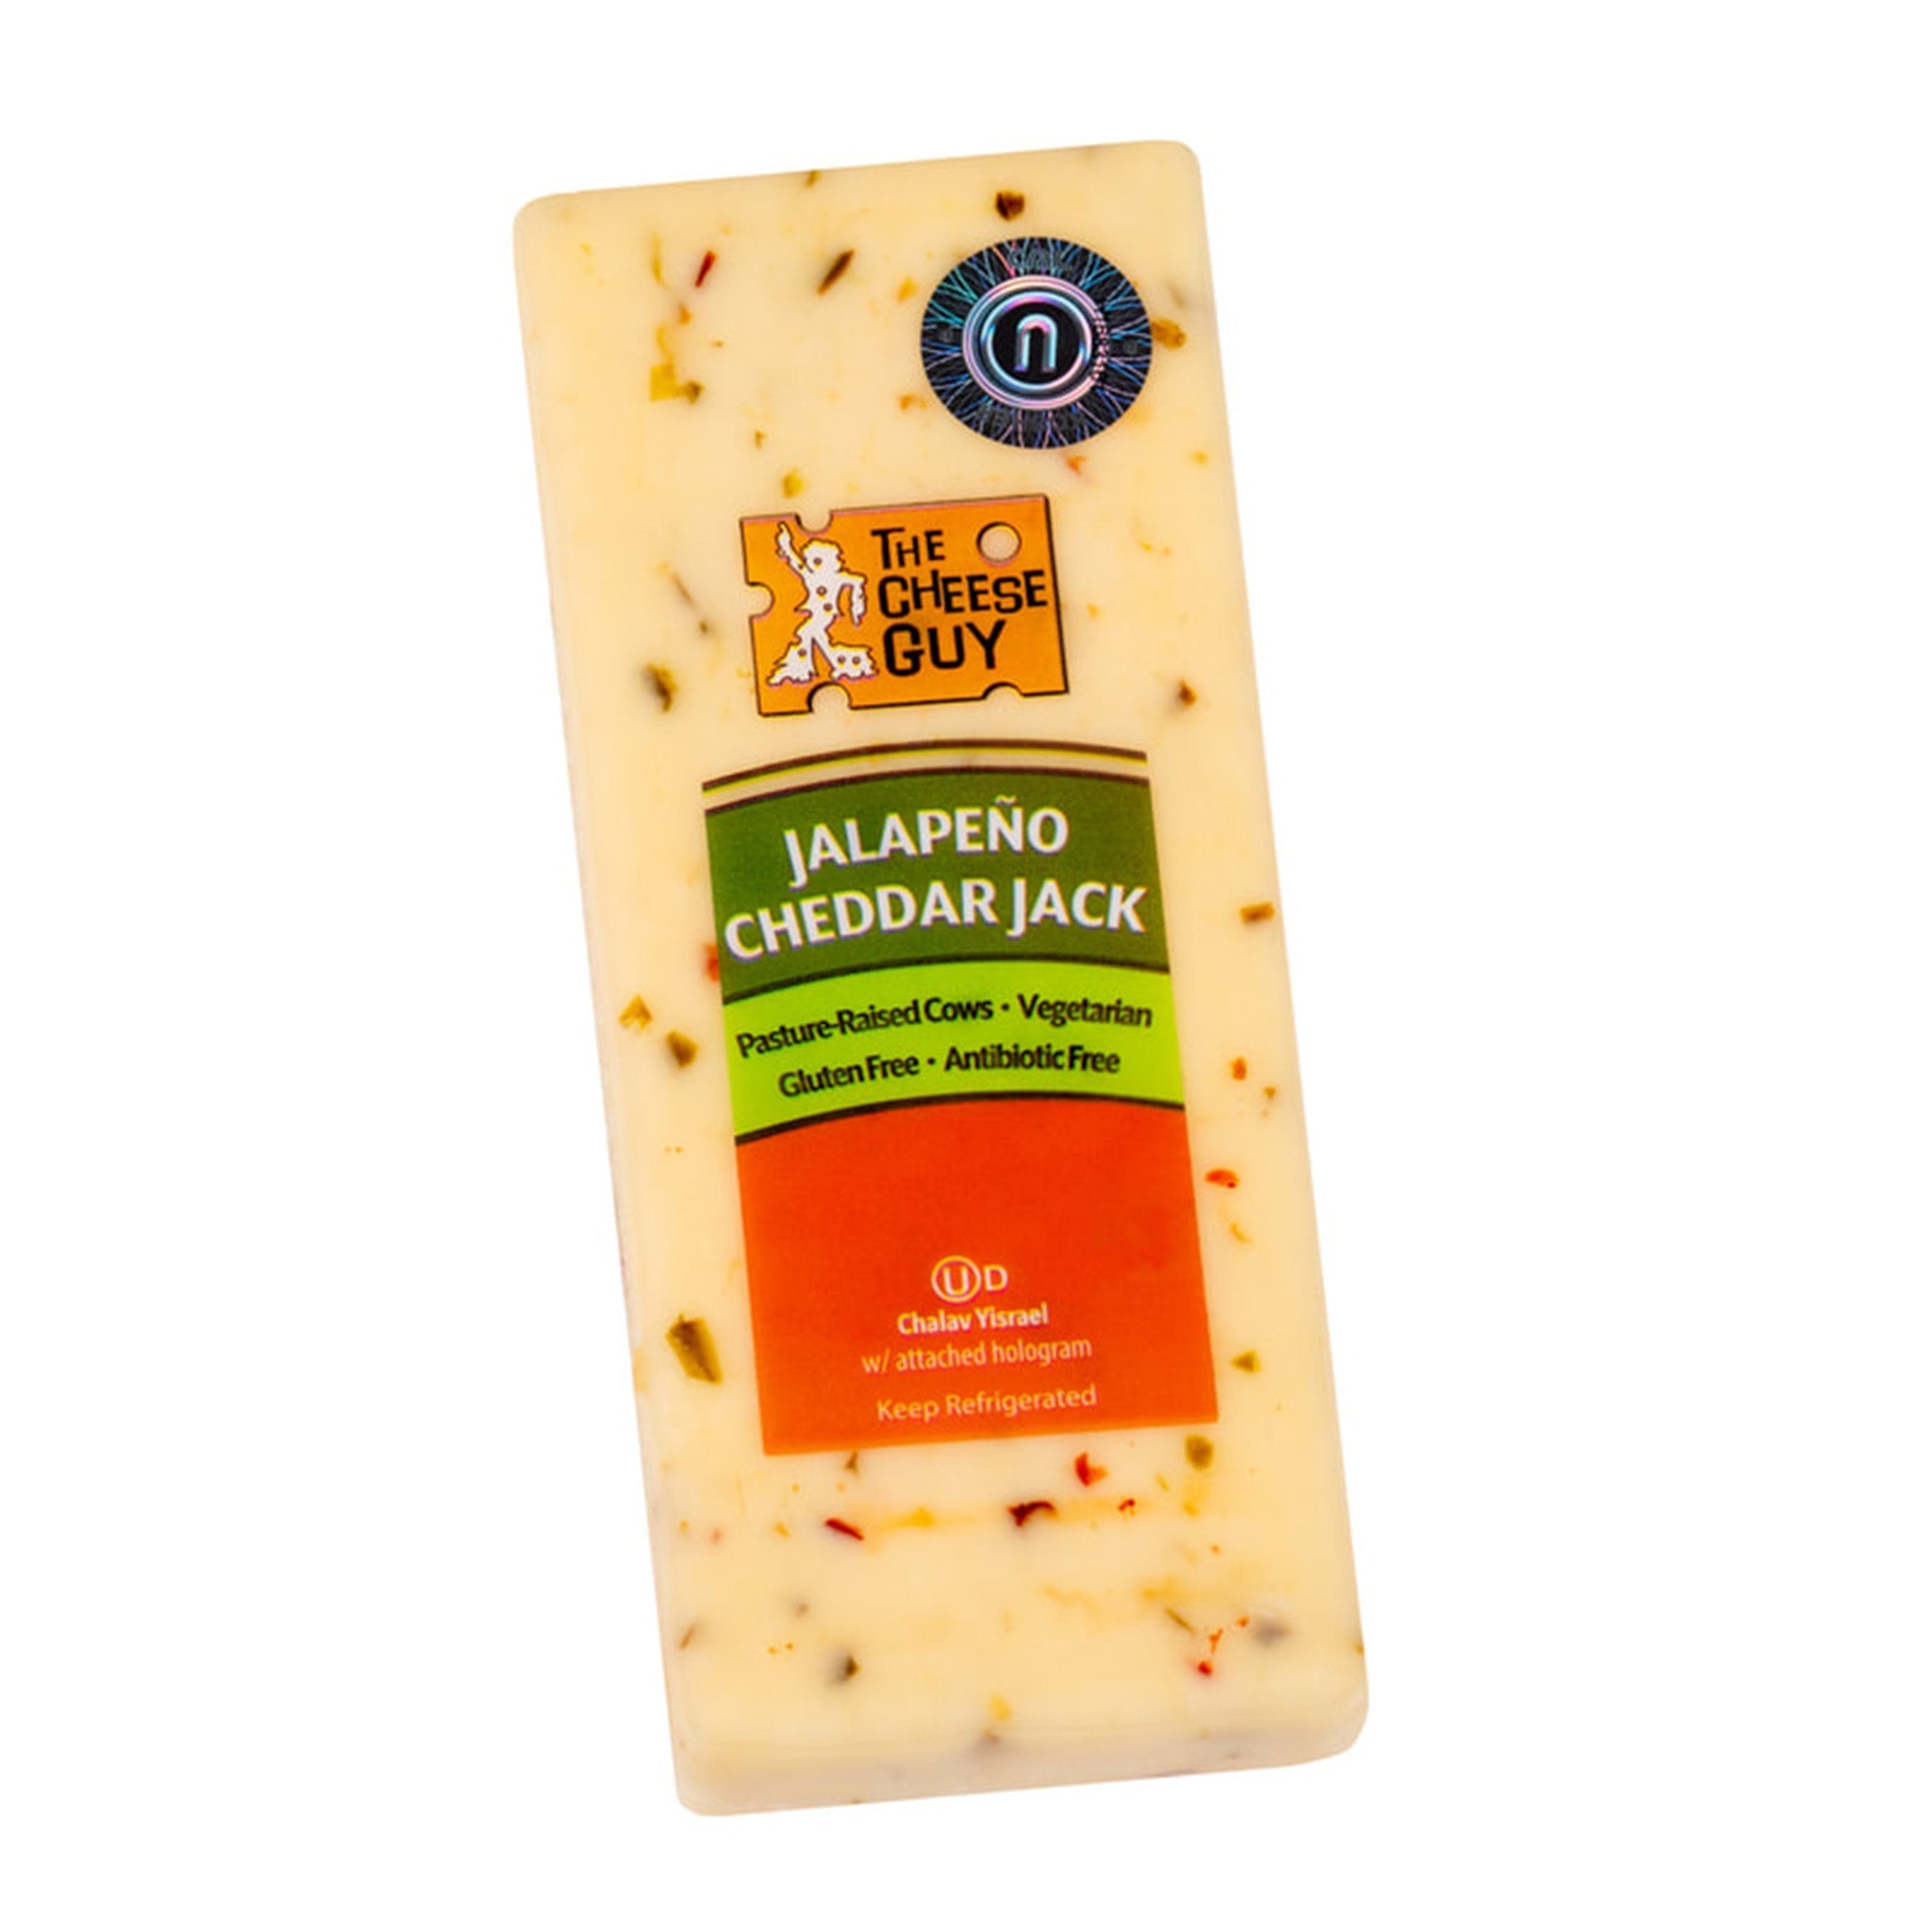 The Cheese Guy Jalapeno Cheddar Jack 6.4oz 12ct